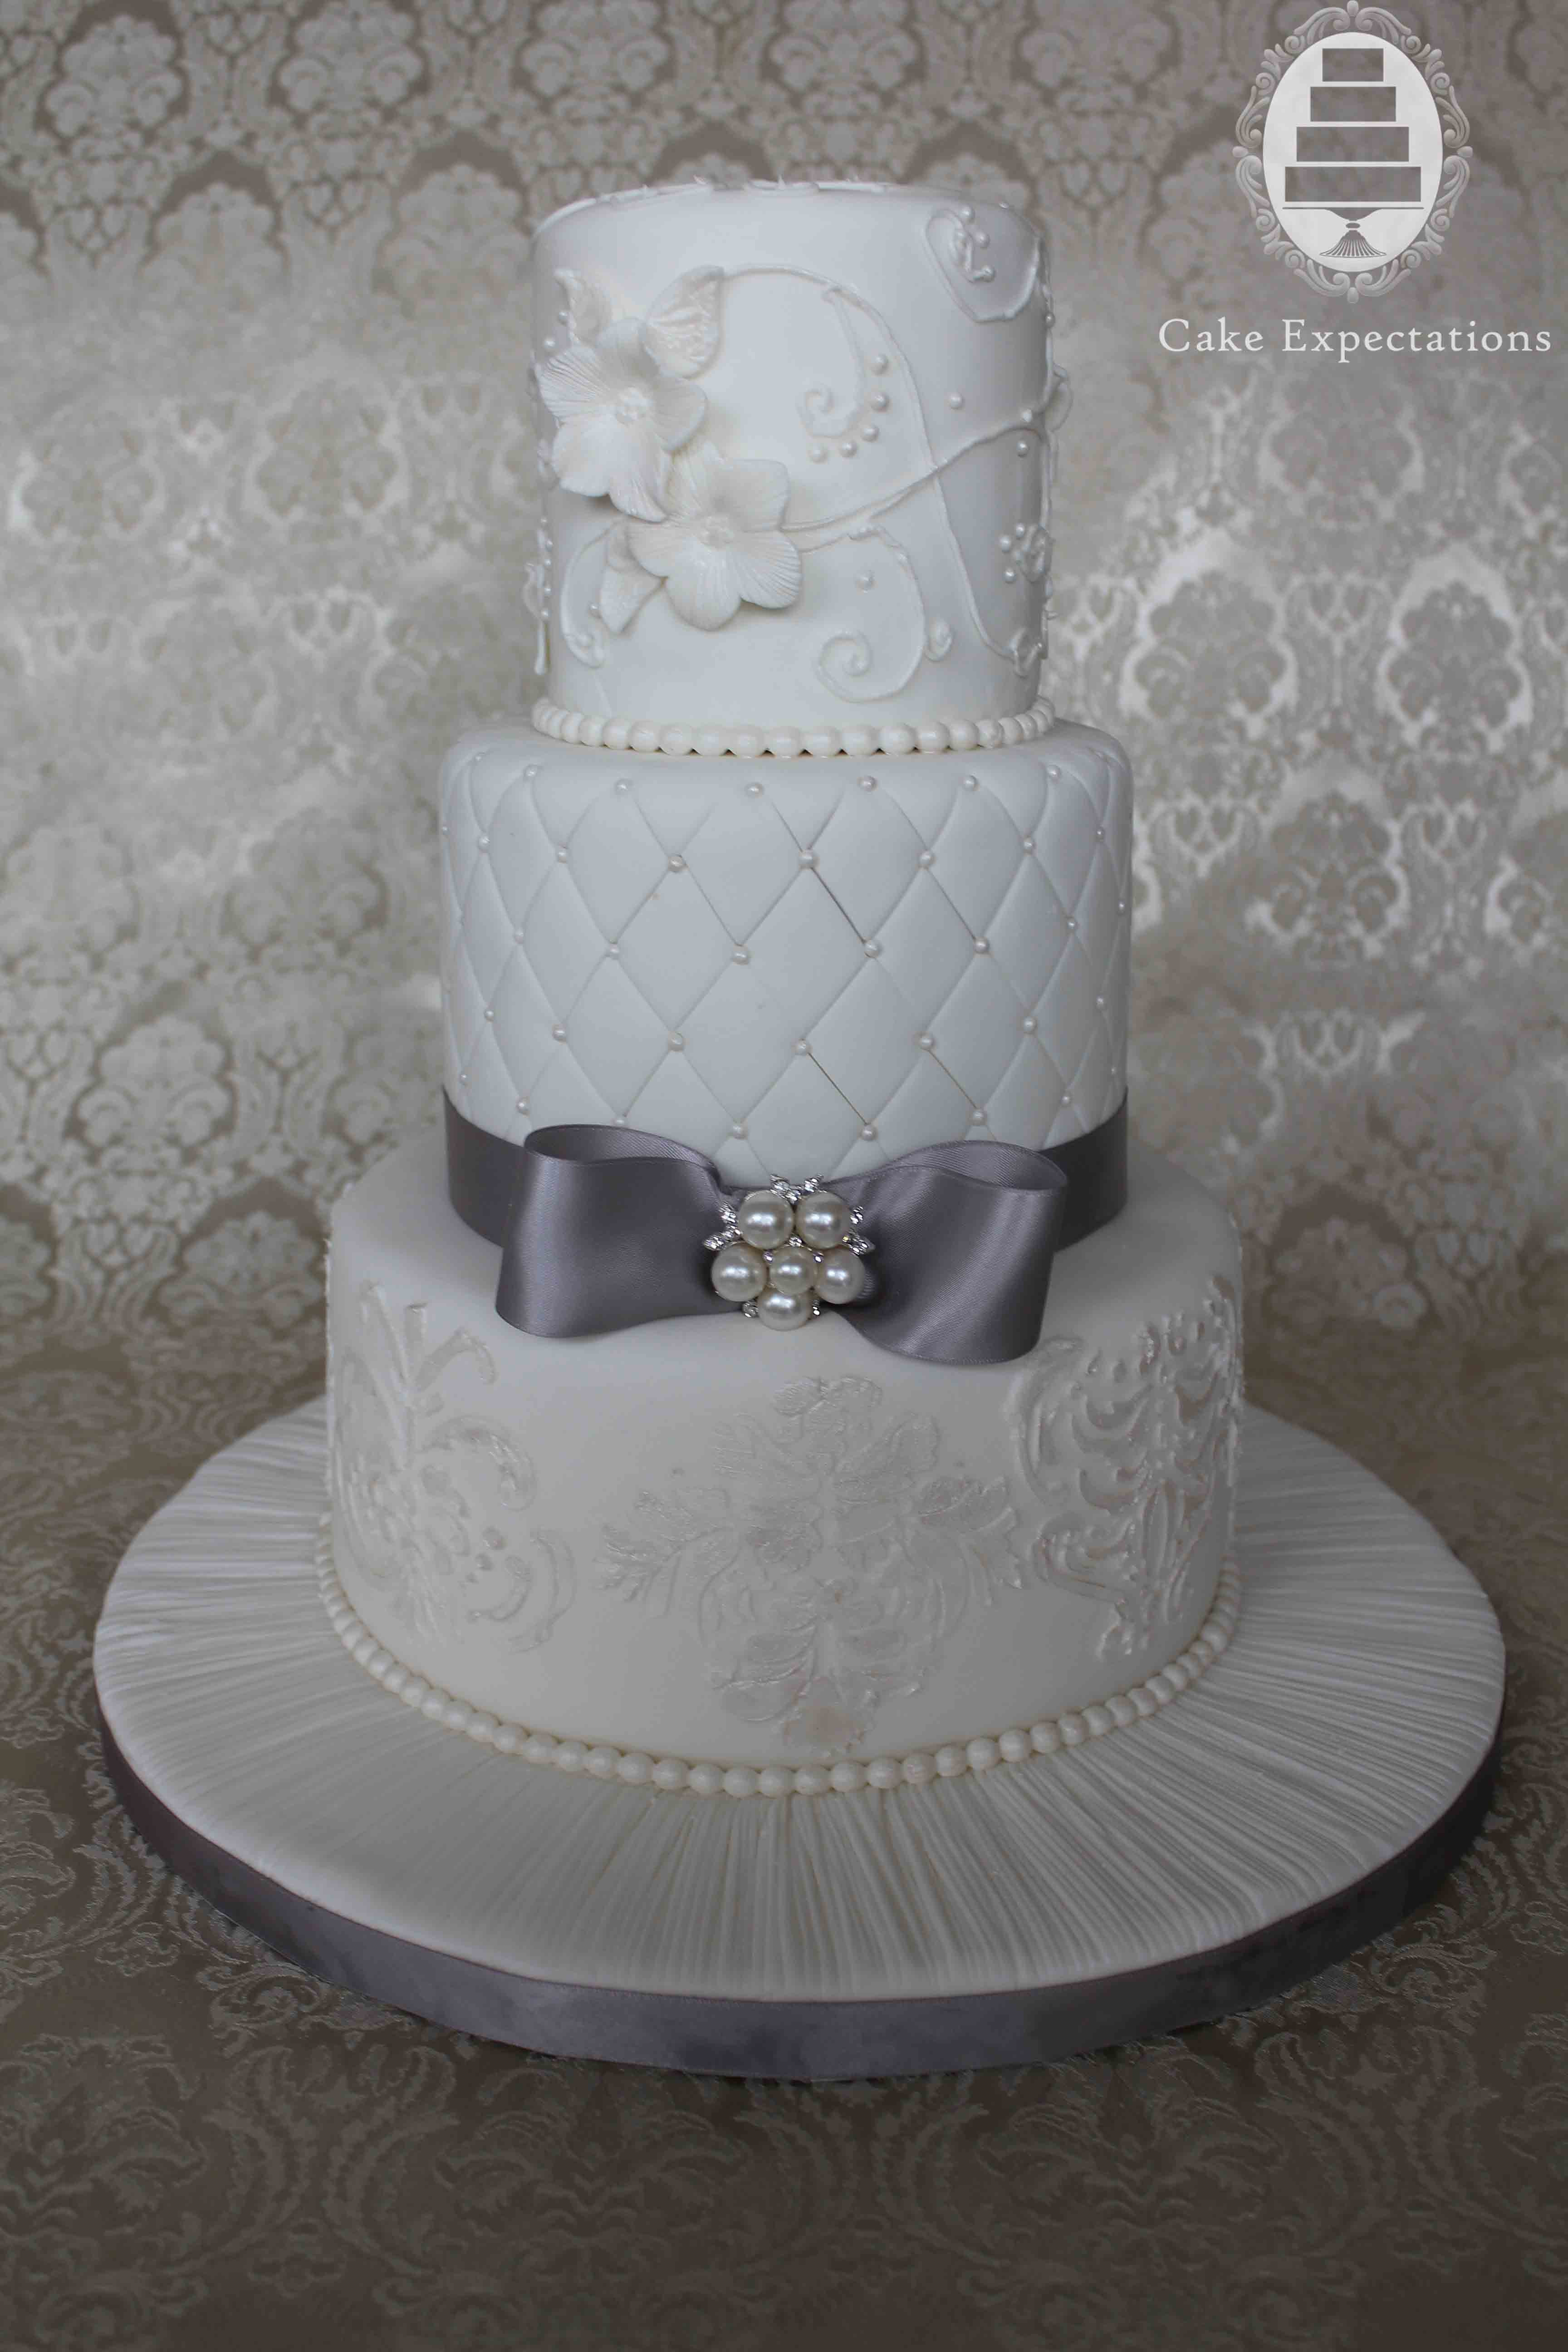 White and Silver Wedding Cakes 20 Of the Best Ideas for Cake Expectations –